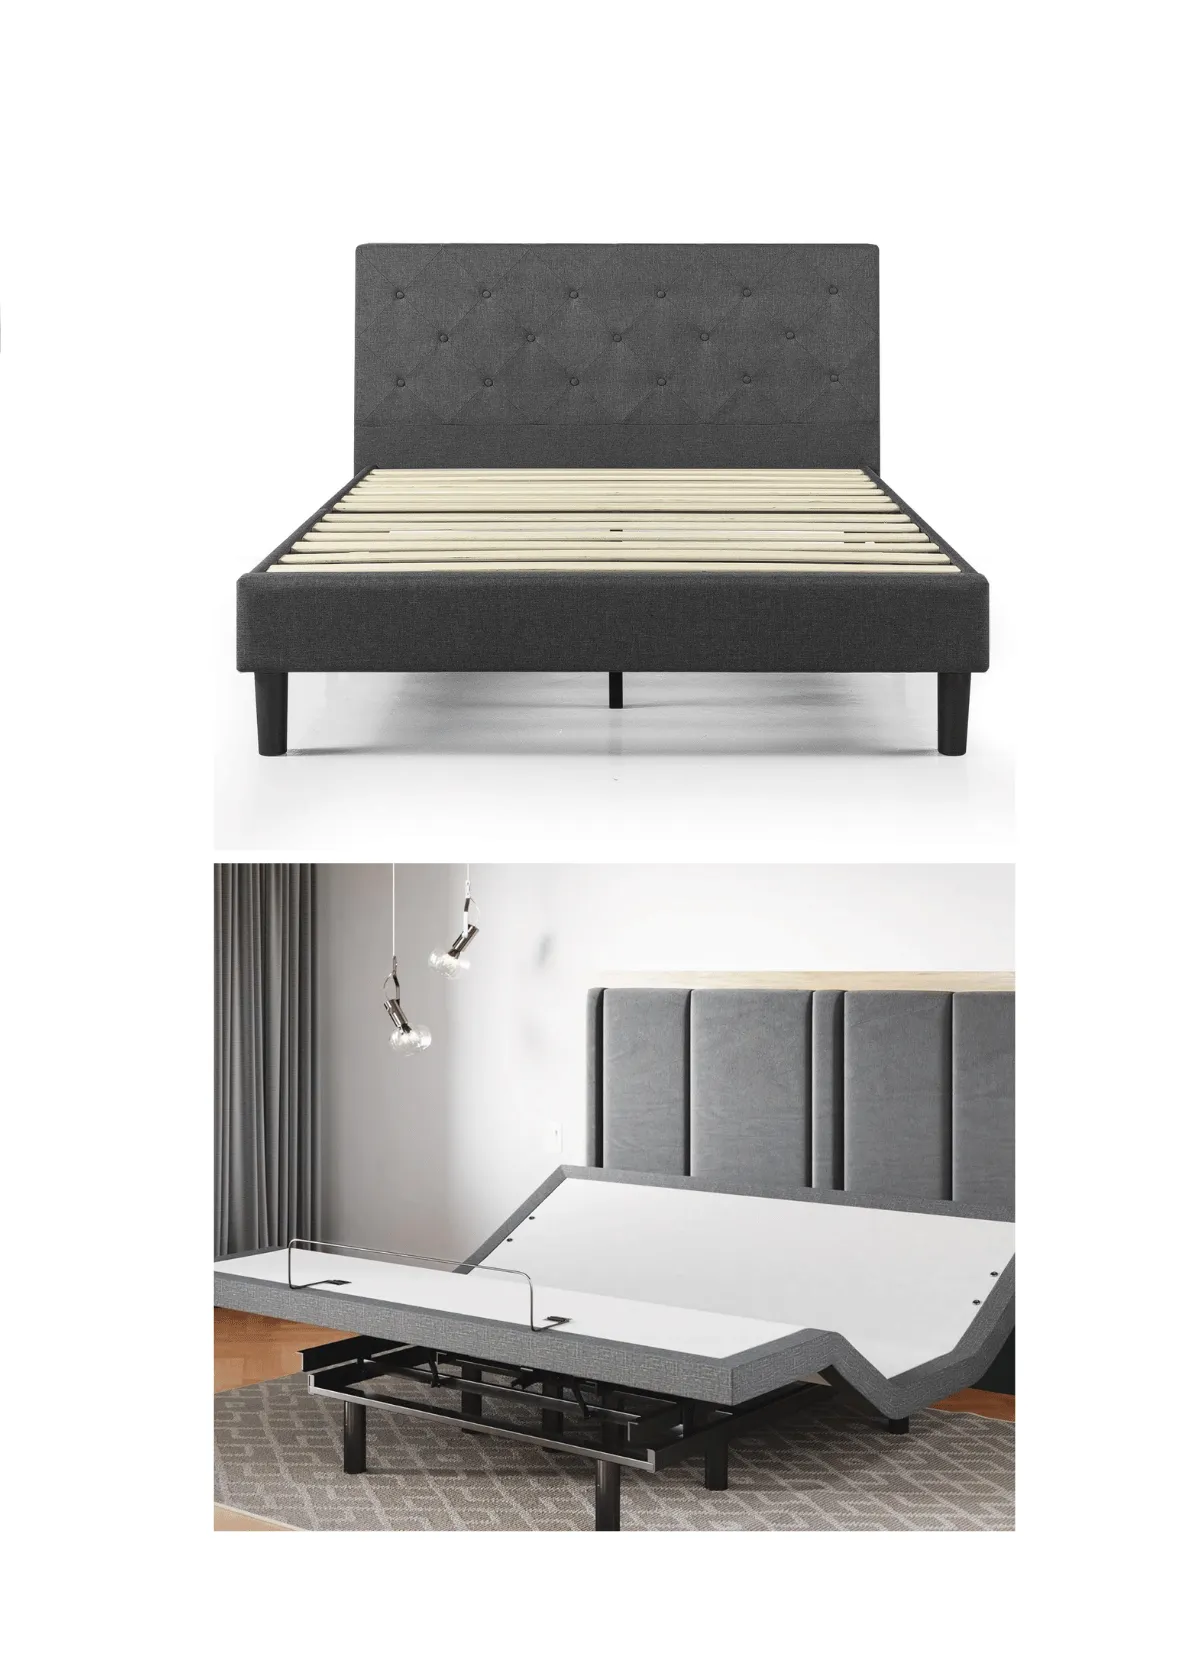 "Bed Frame Buying Guide | Upgrade Your Bedroom With Style Today"